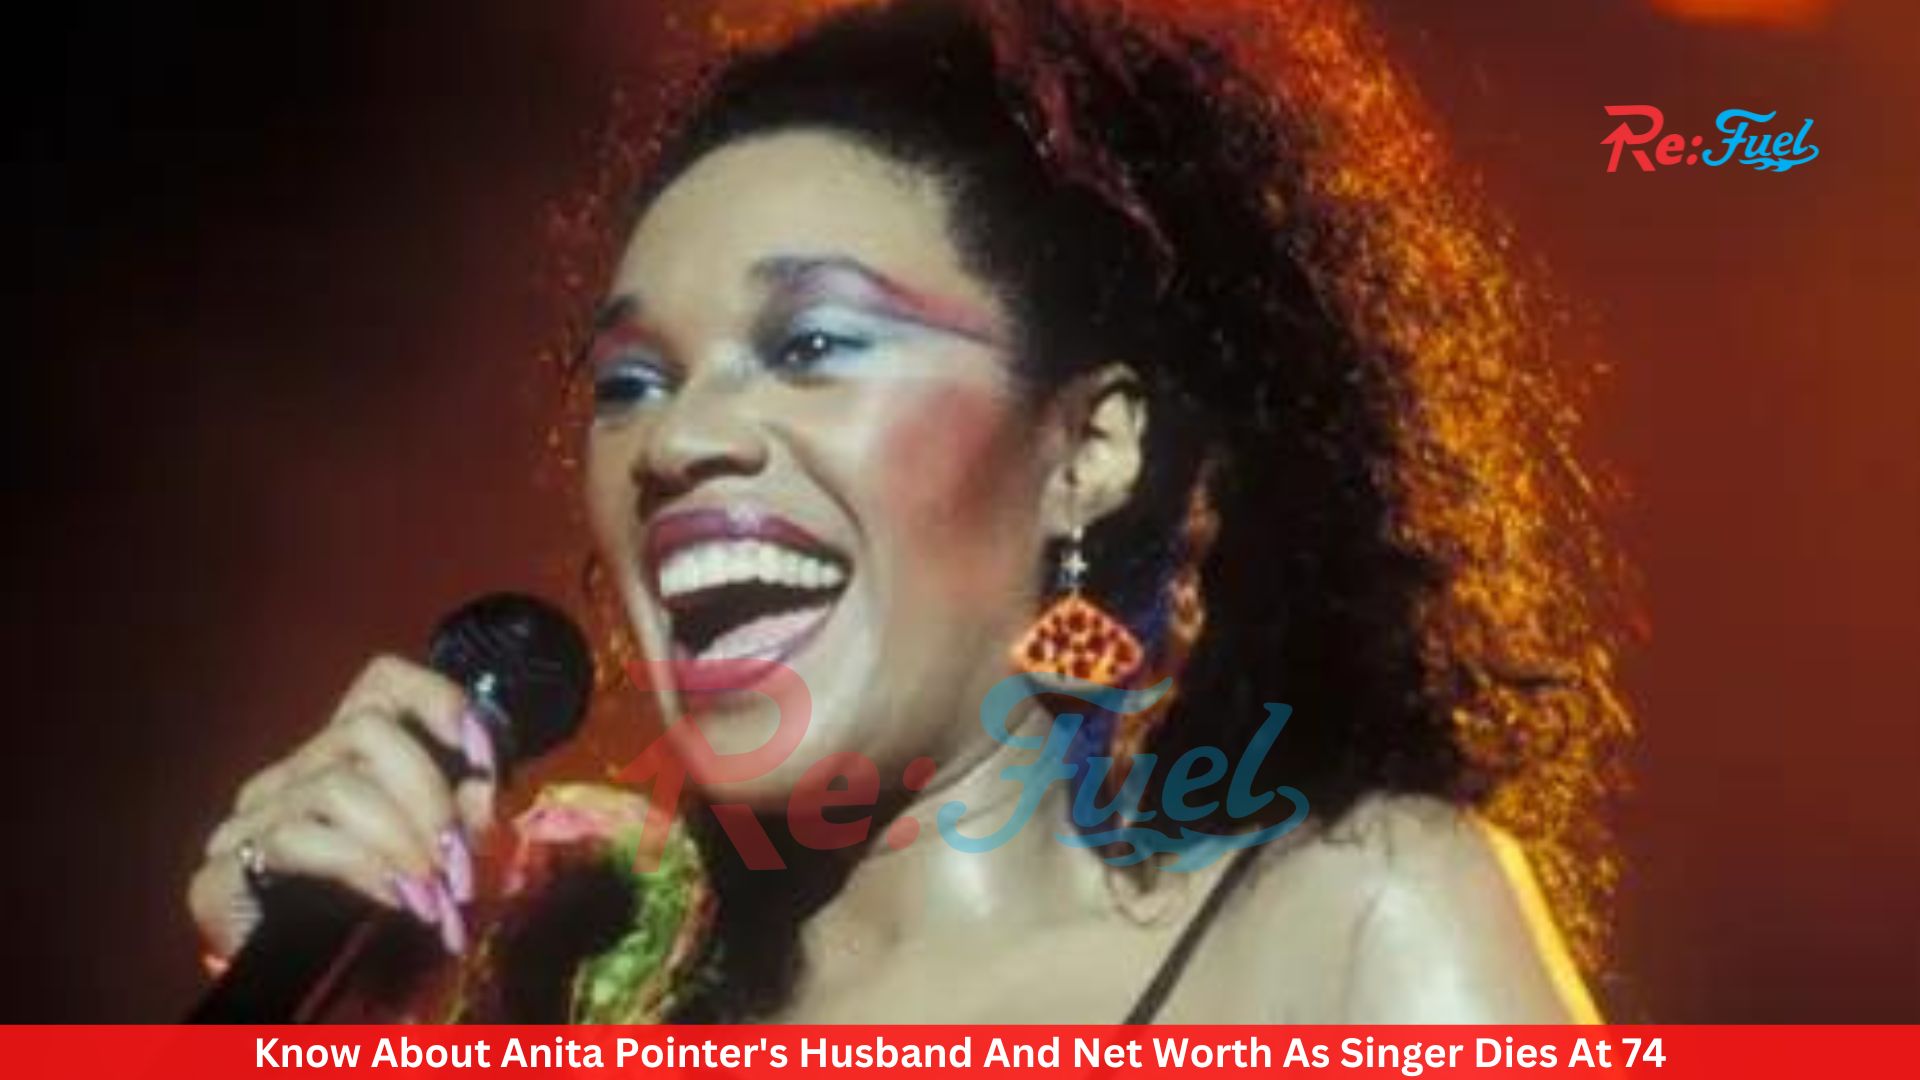 Know About Anita Pointer's Husband And Net Worth As Singer Dies At 74